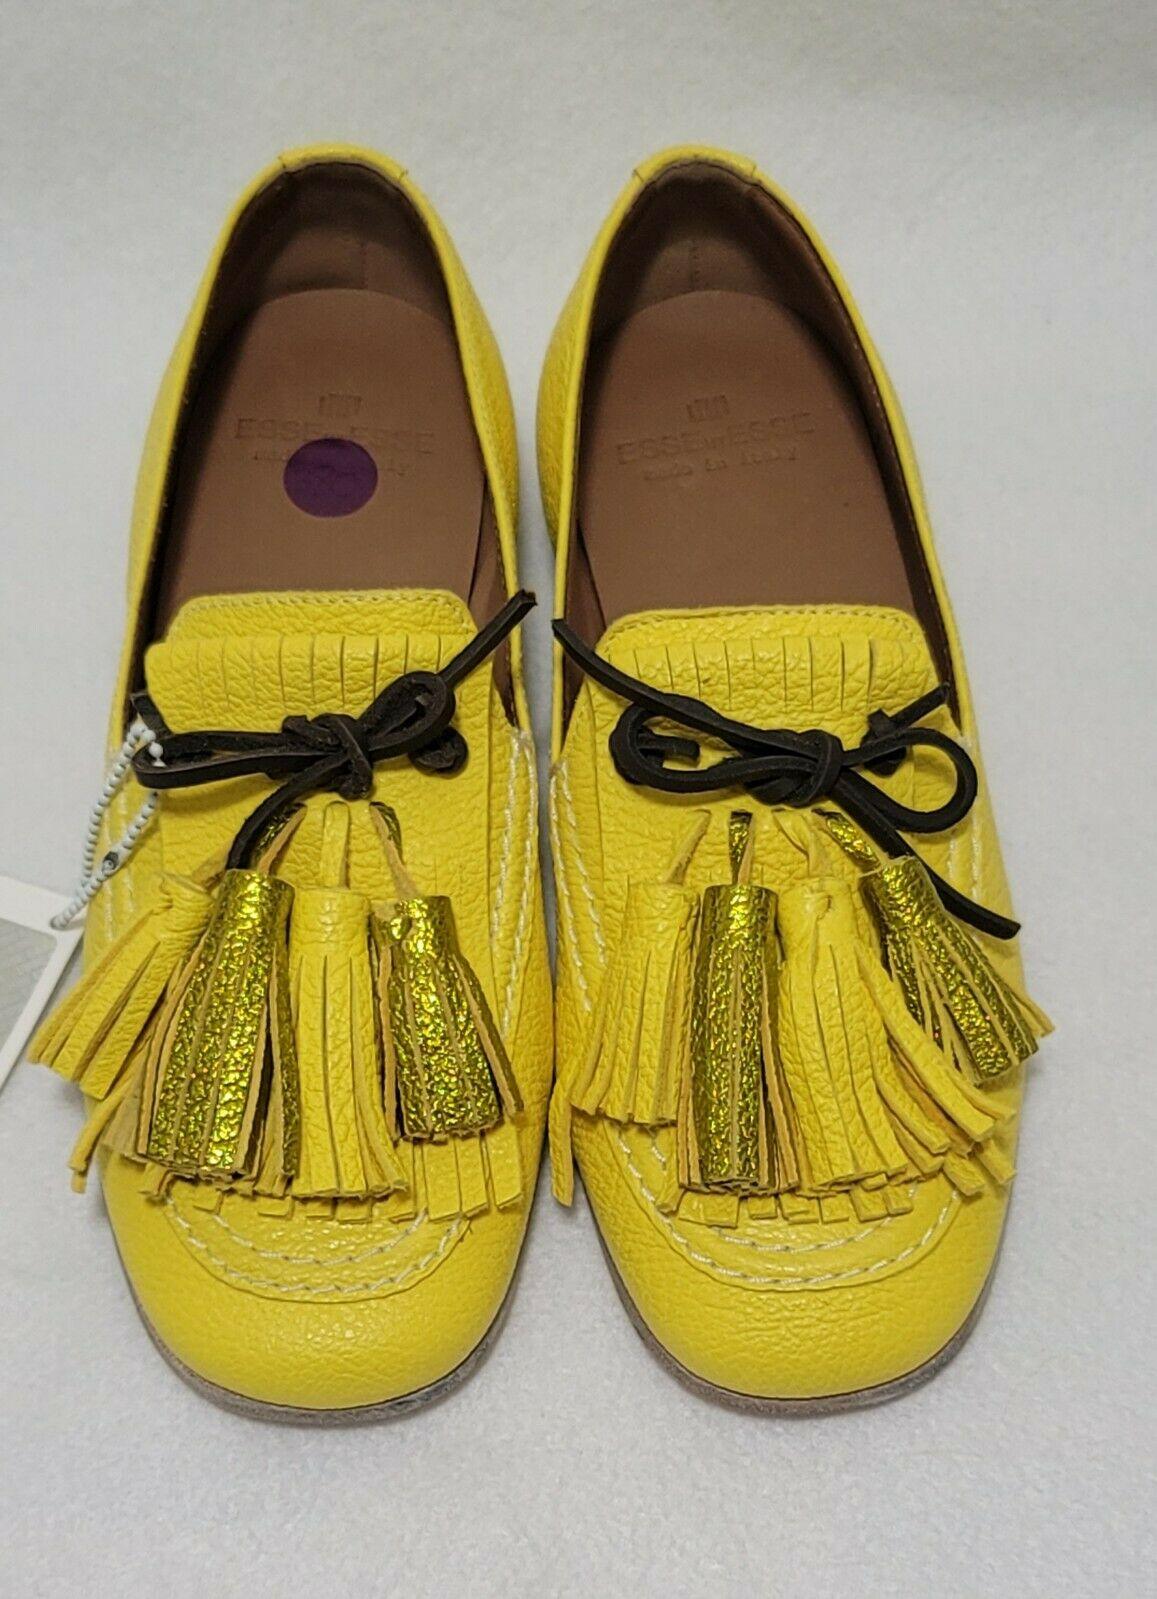 ESSE UT ESSE Women's Tassel Loafer Yllow Gold Shoes Size EU 36 US 6  Italy - SVNYFancy